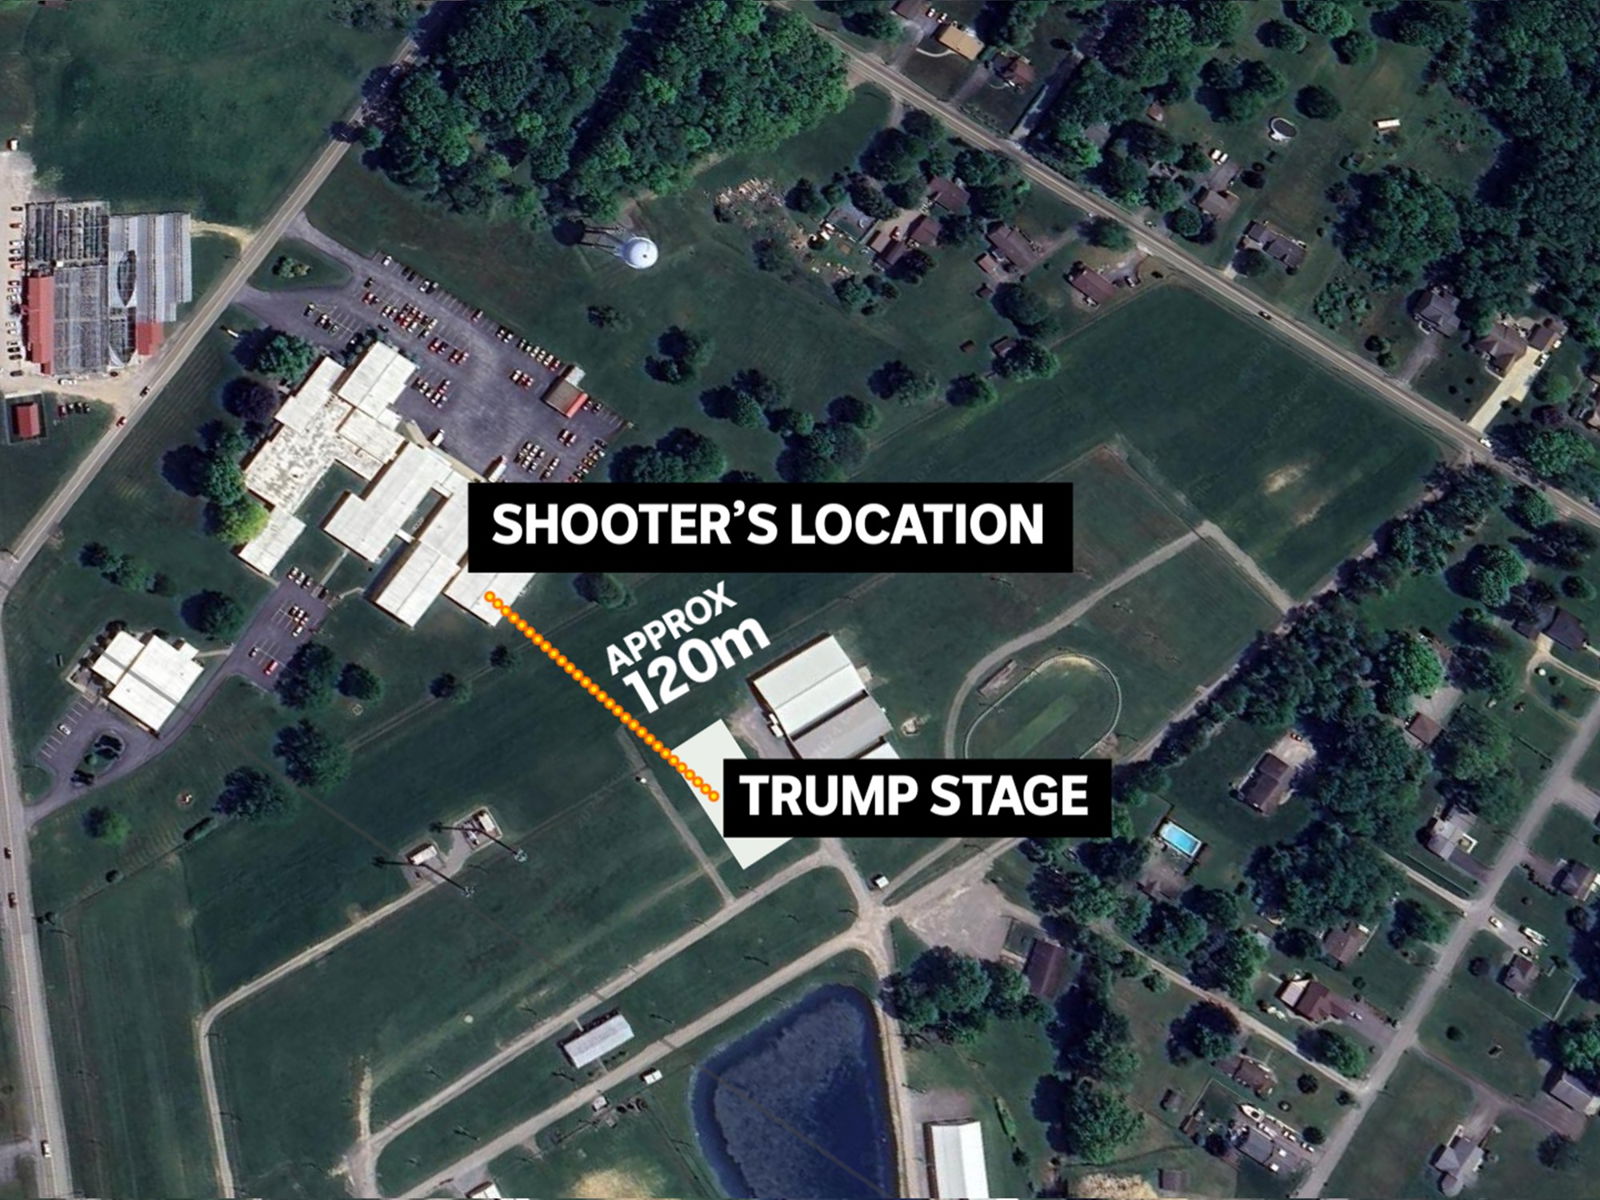 A map of the shooter's location and the stage 